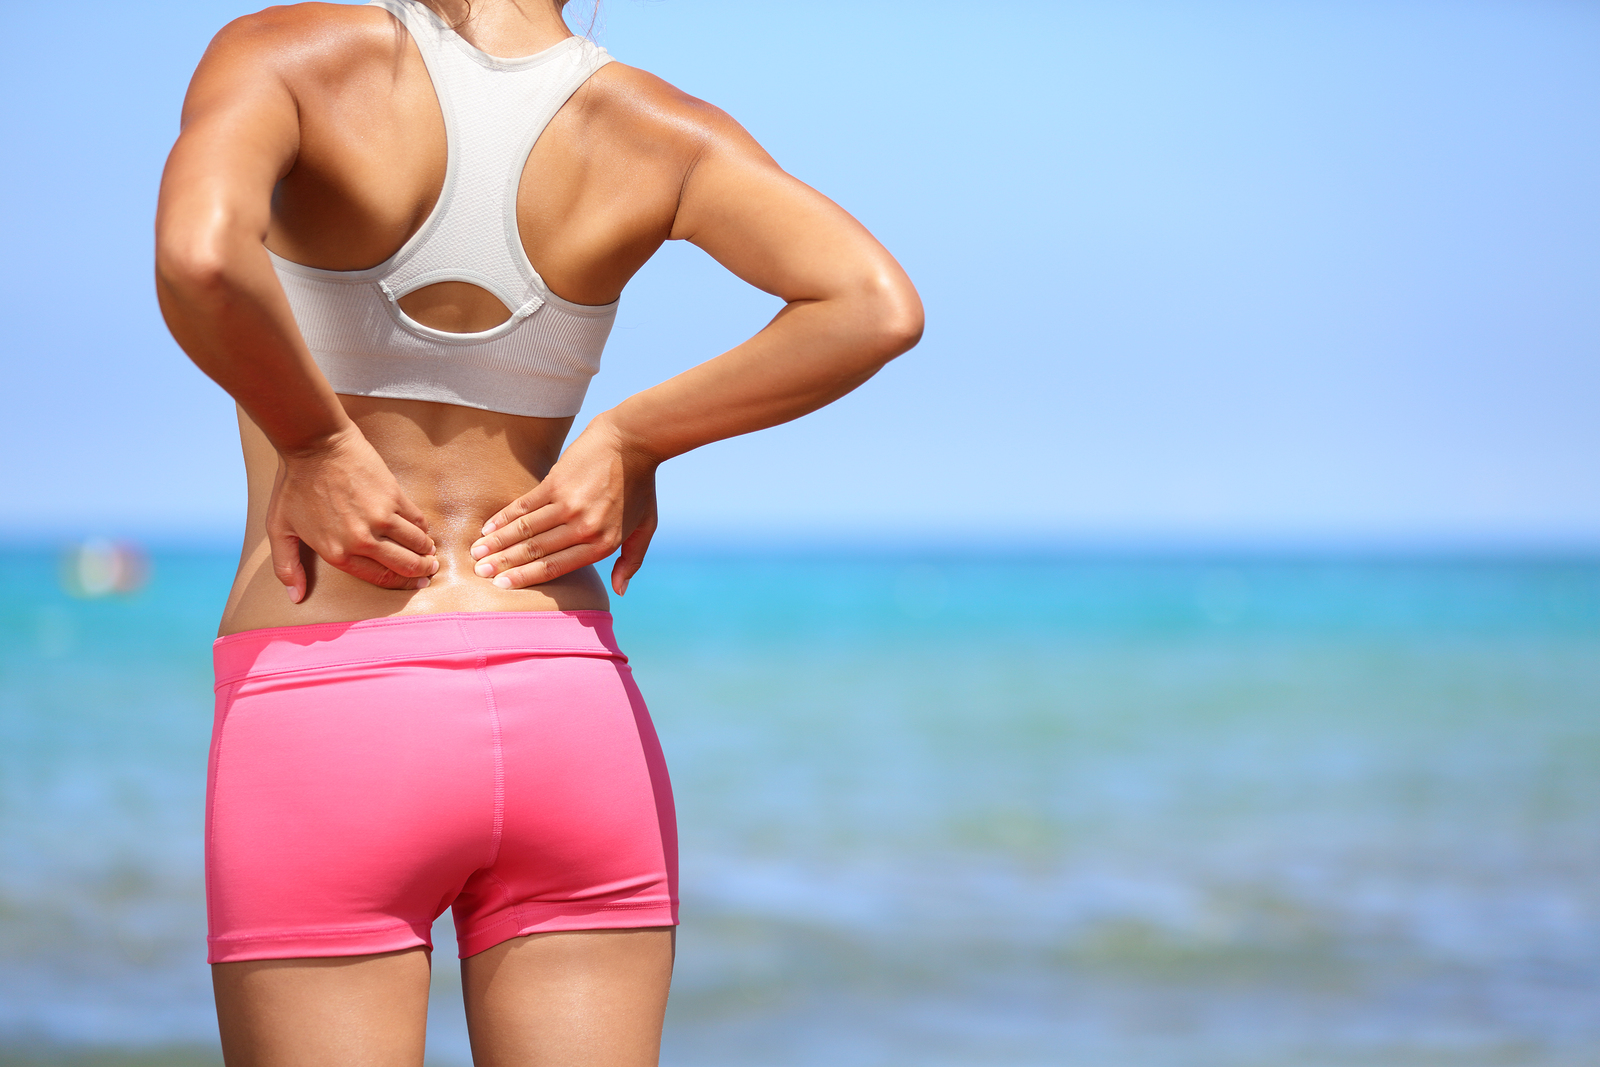 Spinal Adjustment Therapy In Edmonton, AB